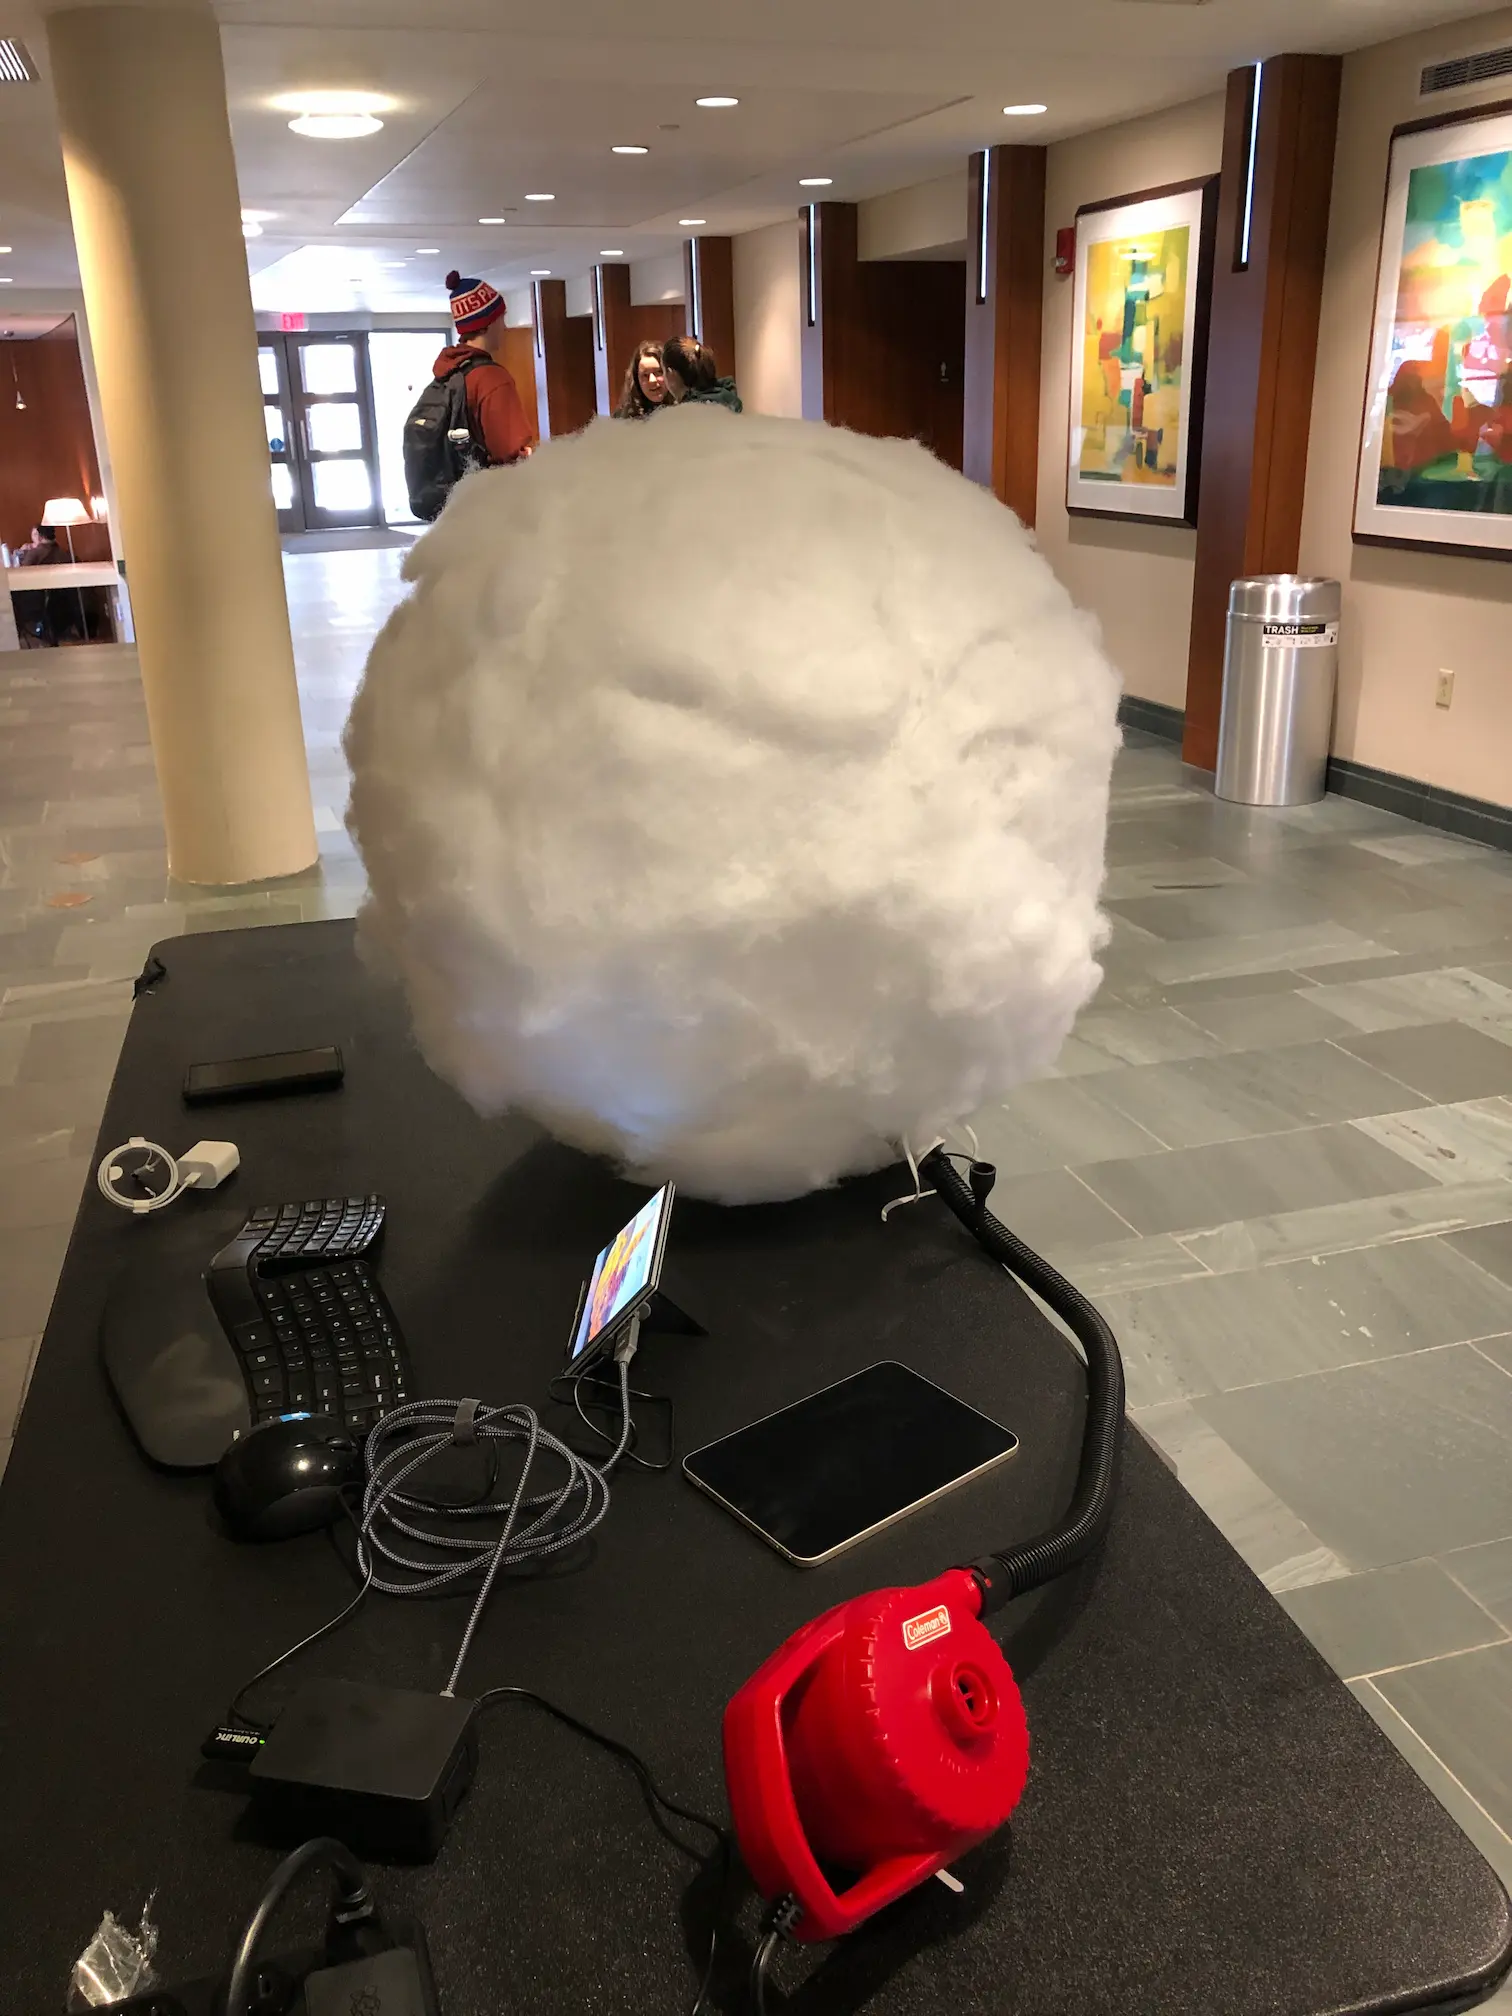 The cloud application and attachment set up in the Casperson Student Center.